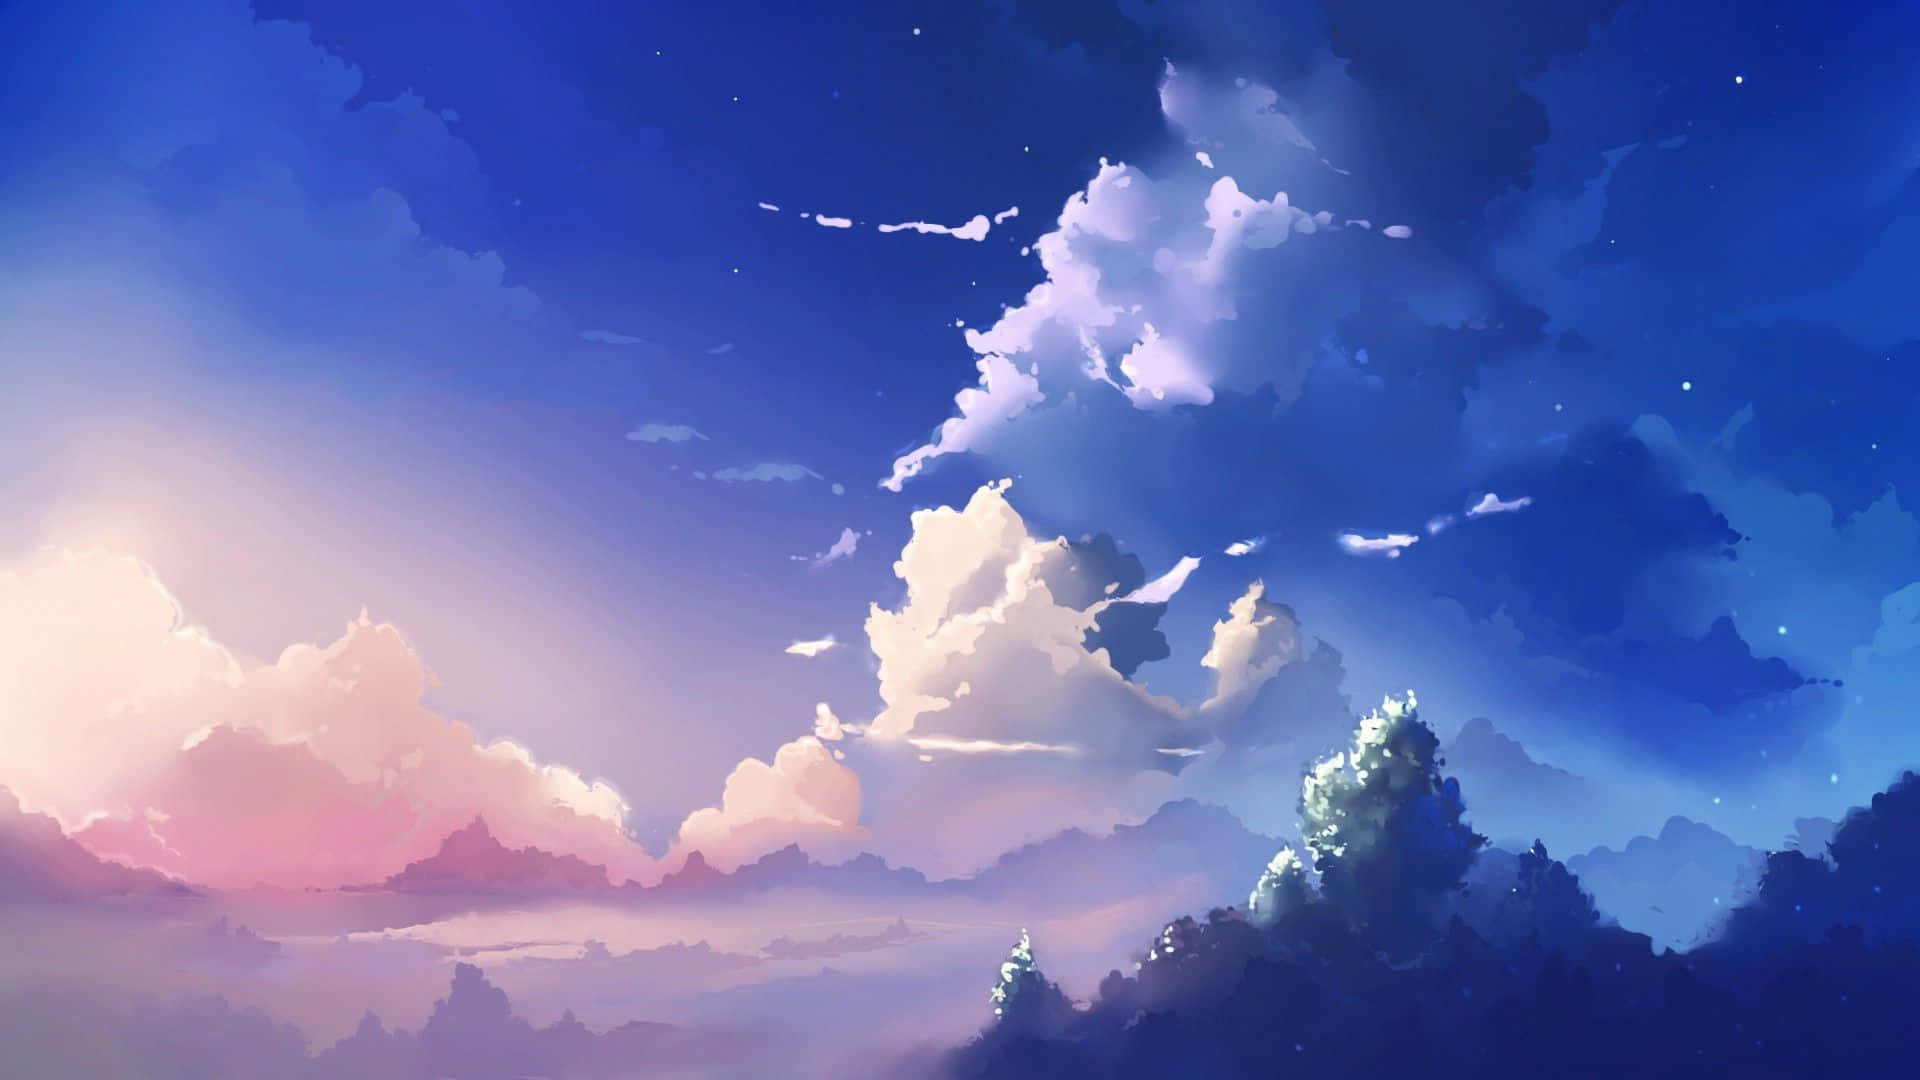 Enjoy A Peaceful Nature View With This Cute Anime-style Landscape Background